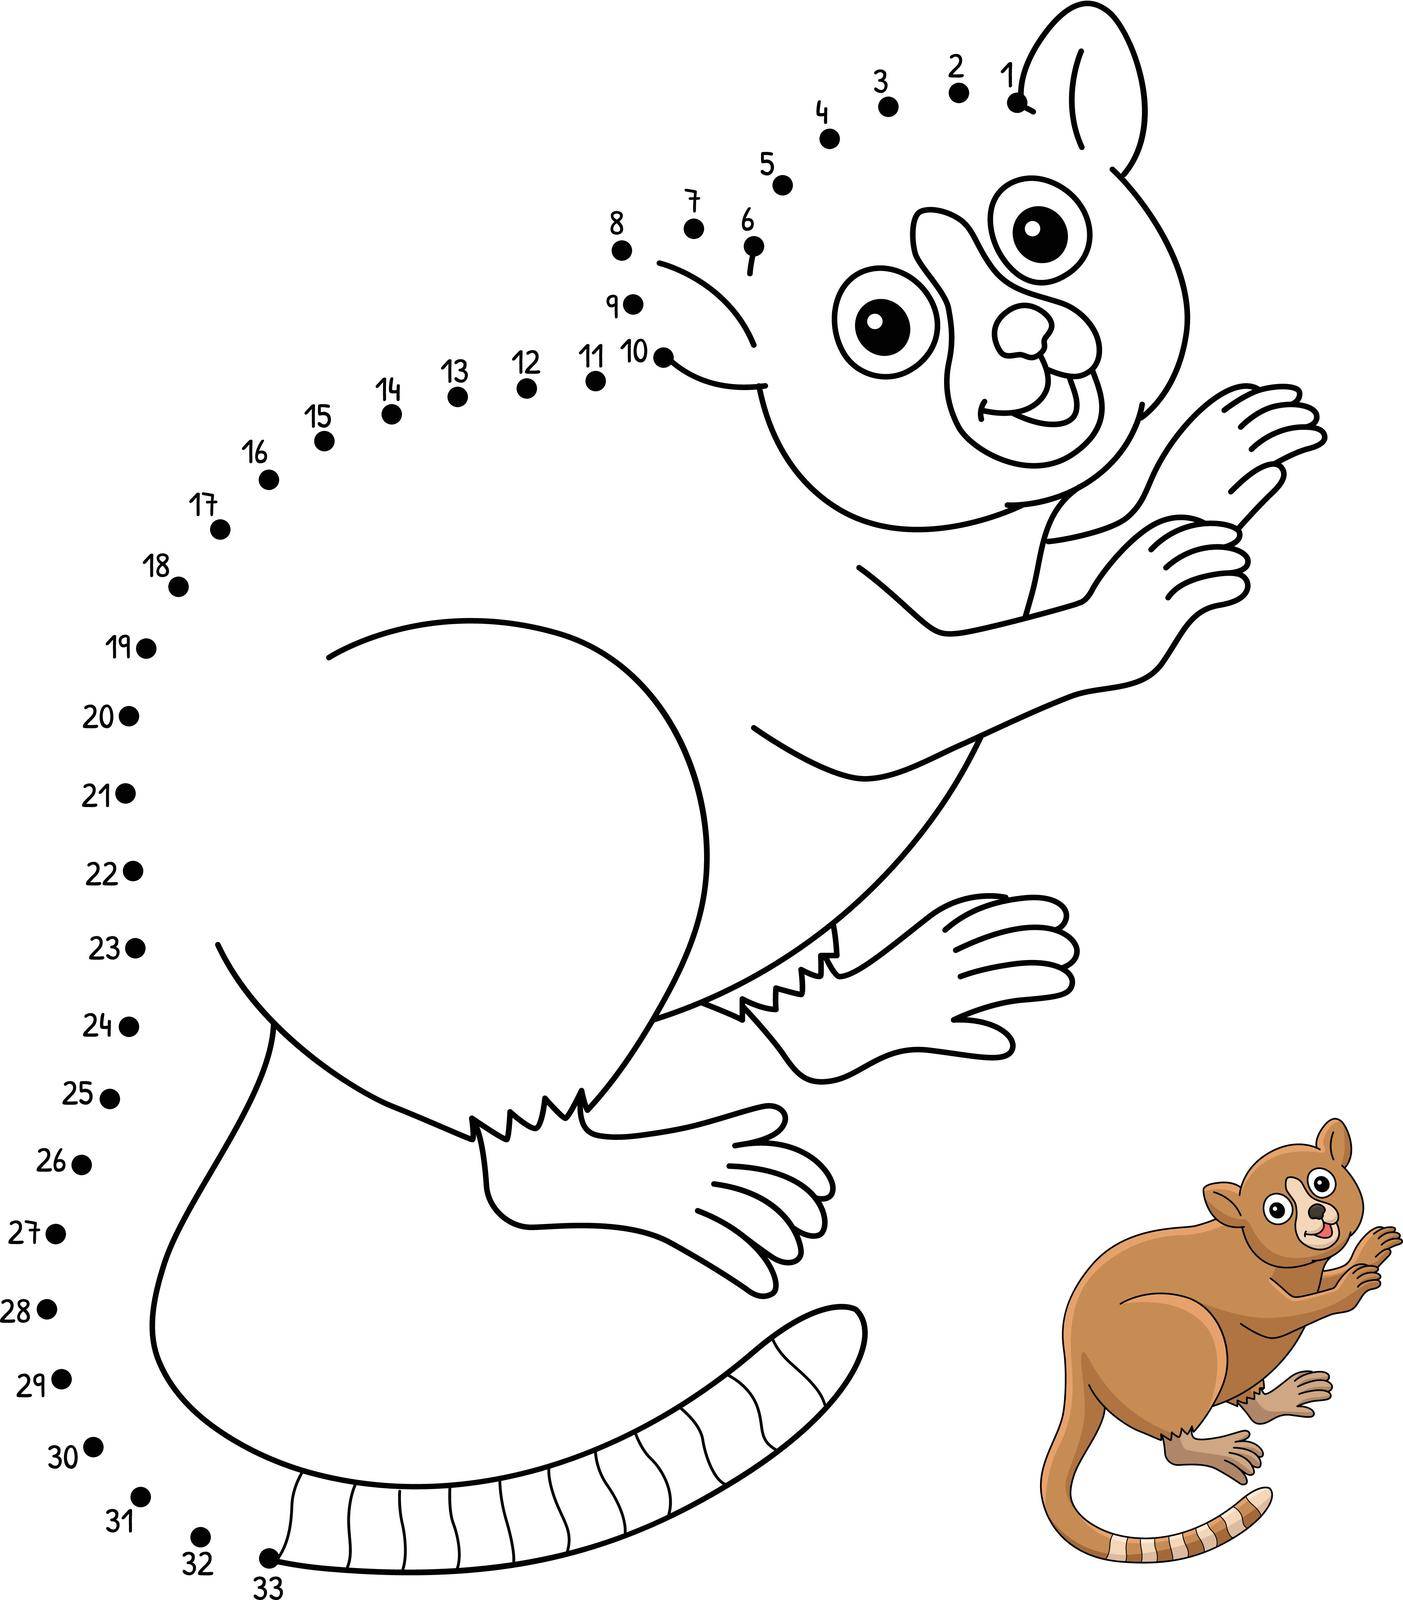 A cute and funny connect-the-dots coloring page of a Mouse Lemur. Provides hours of coloring fun for children. Color, this page is very easy. Suitable for little kids and toddlers.